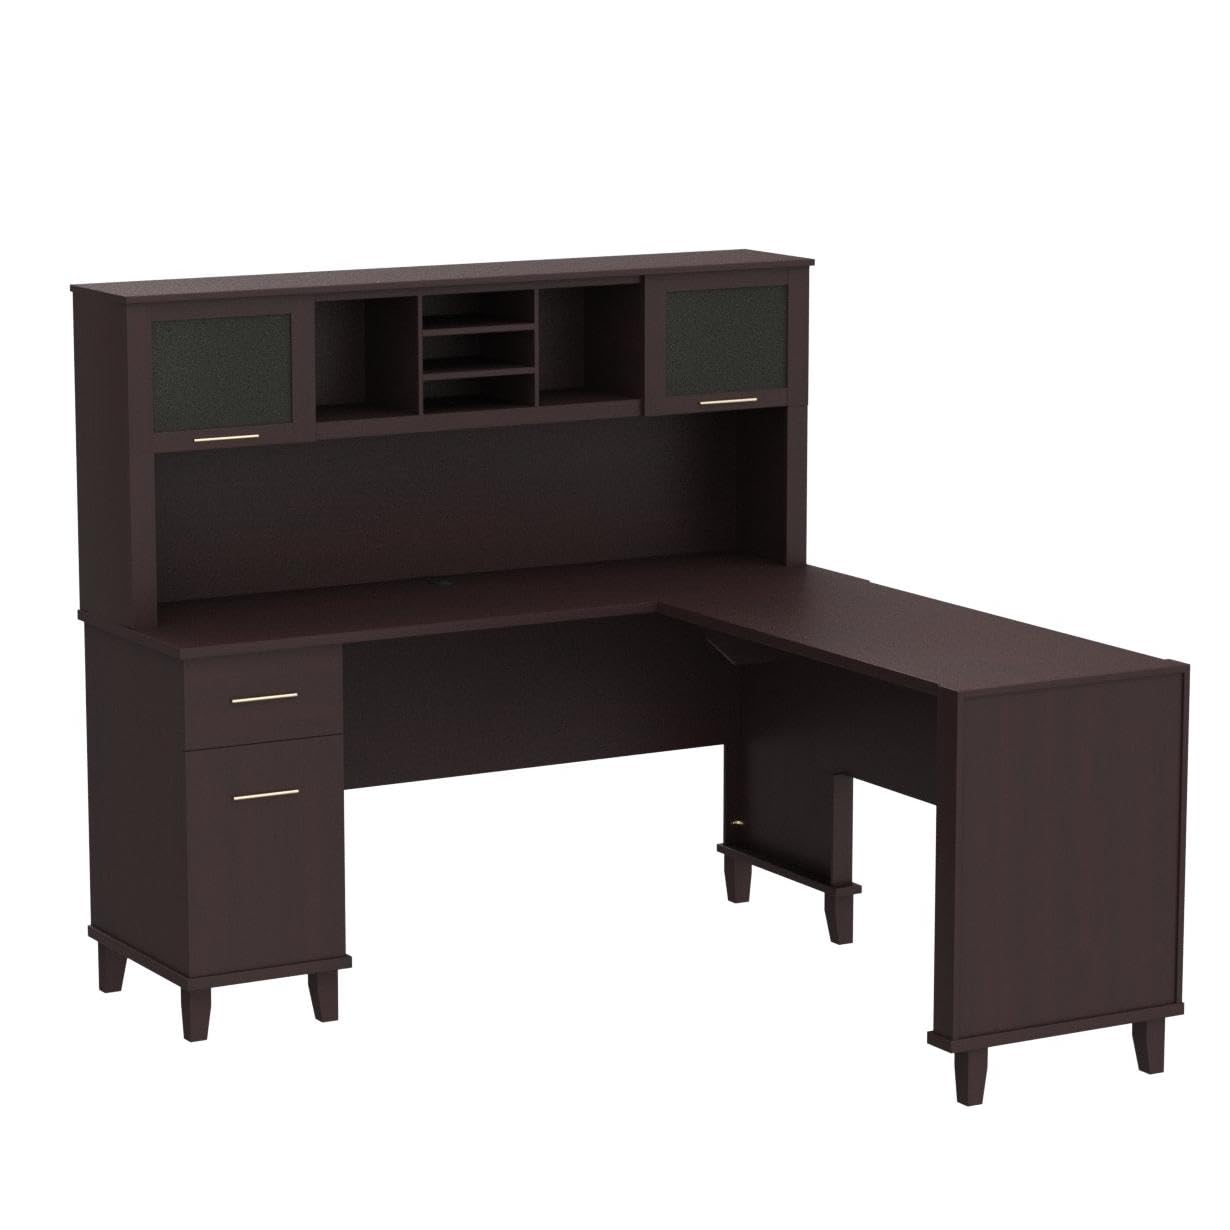 Bush Furniture Somerset 72W 3 Position Sit to Stand L Shaped Desk with Hutch in Mocha Cherry